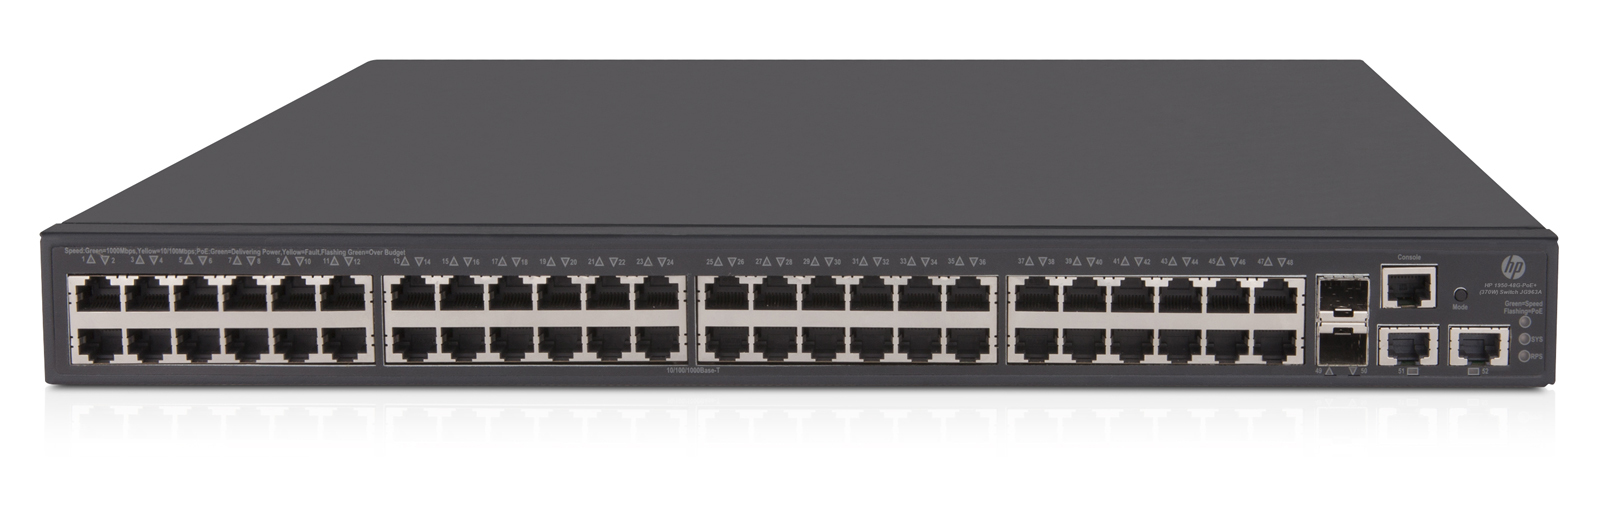 Switch Hpe Officeconnect 1950 48G 2Sfp+ 2Xgt Poe+ Gigabit Ethernet